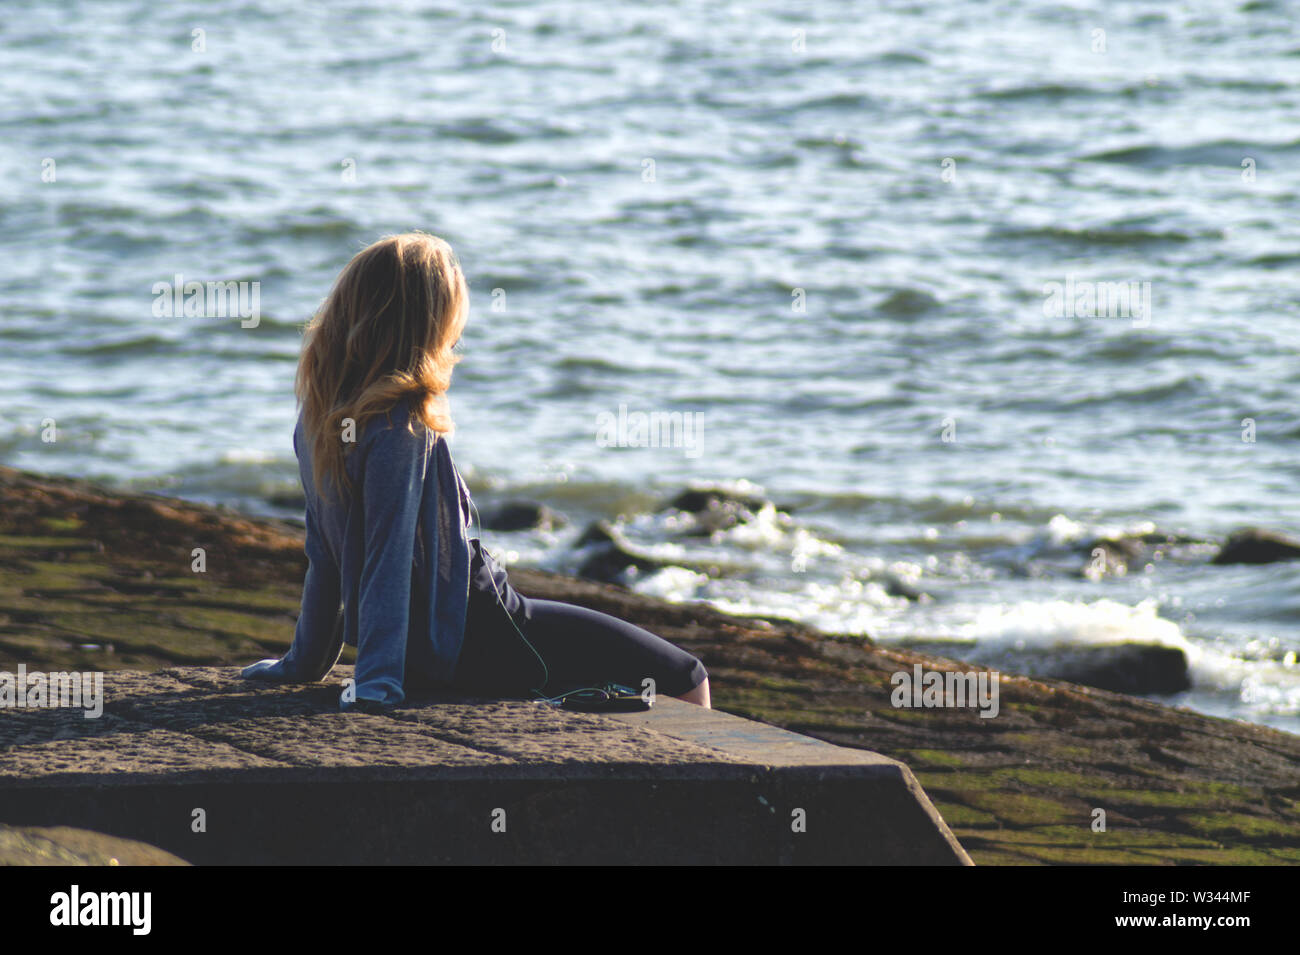 A single blond woman sitting on a stone pier looking out at the sea listening to music Stock Photo